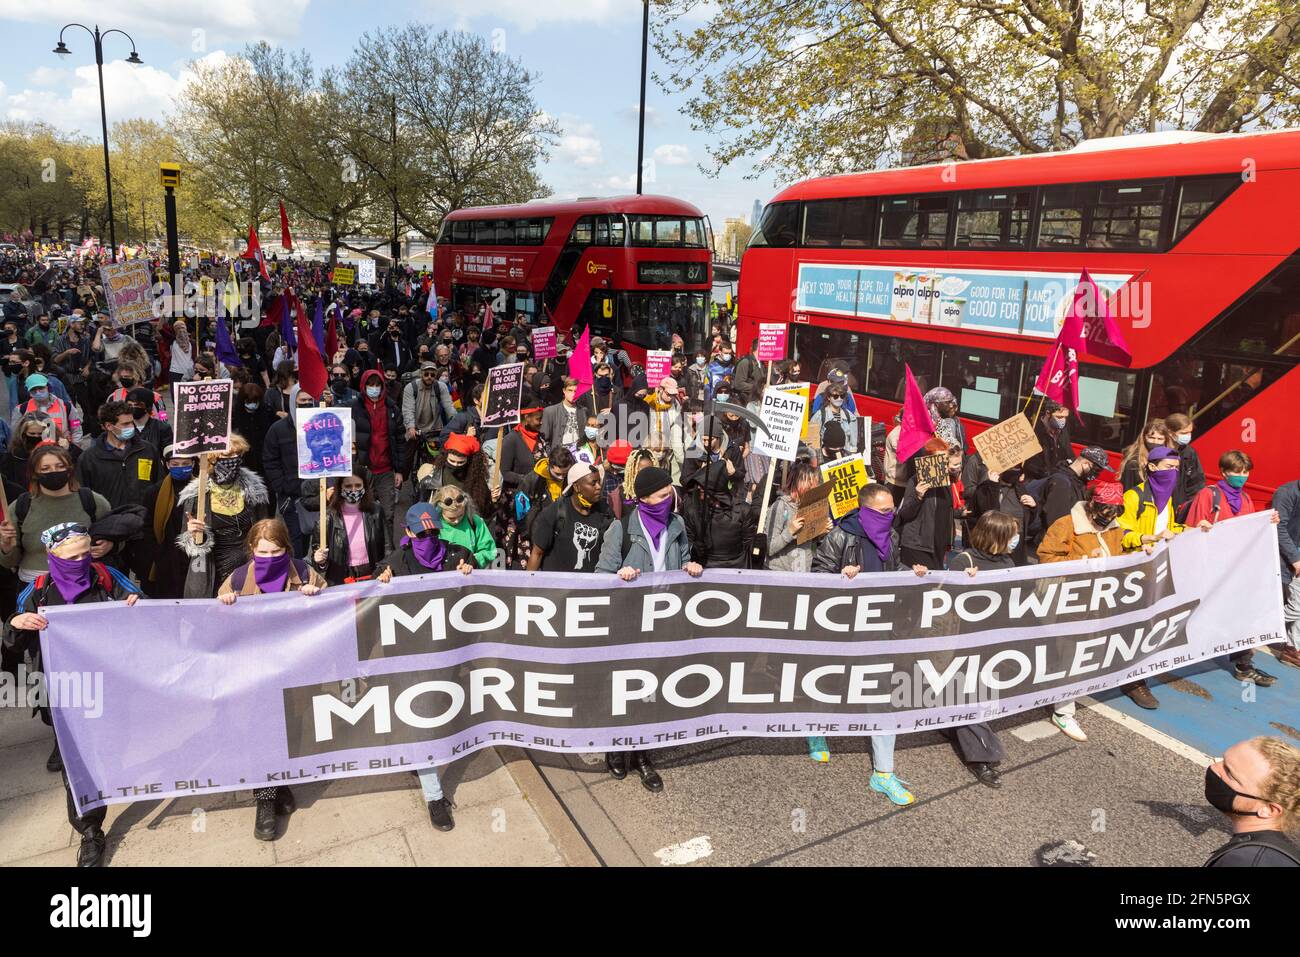 Protesters marching with banner and placards during 'Kill the Bill' protest against new policing bill, London, 1 May 2021 Stock Photo